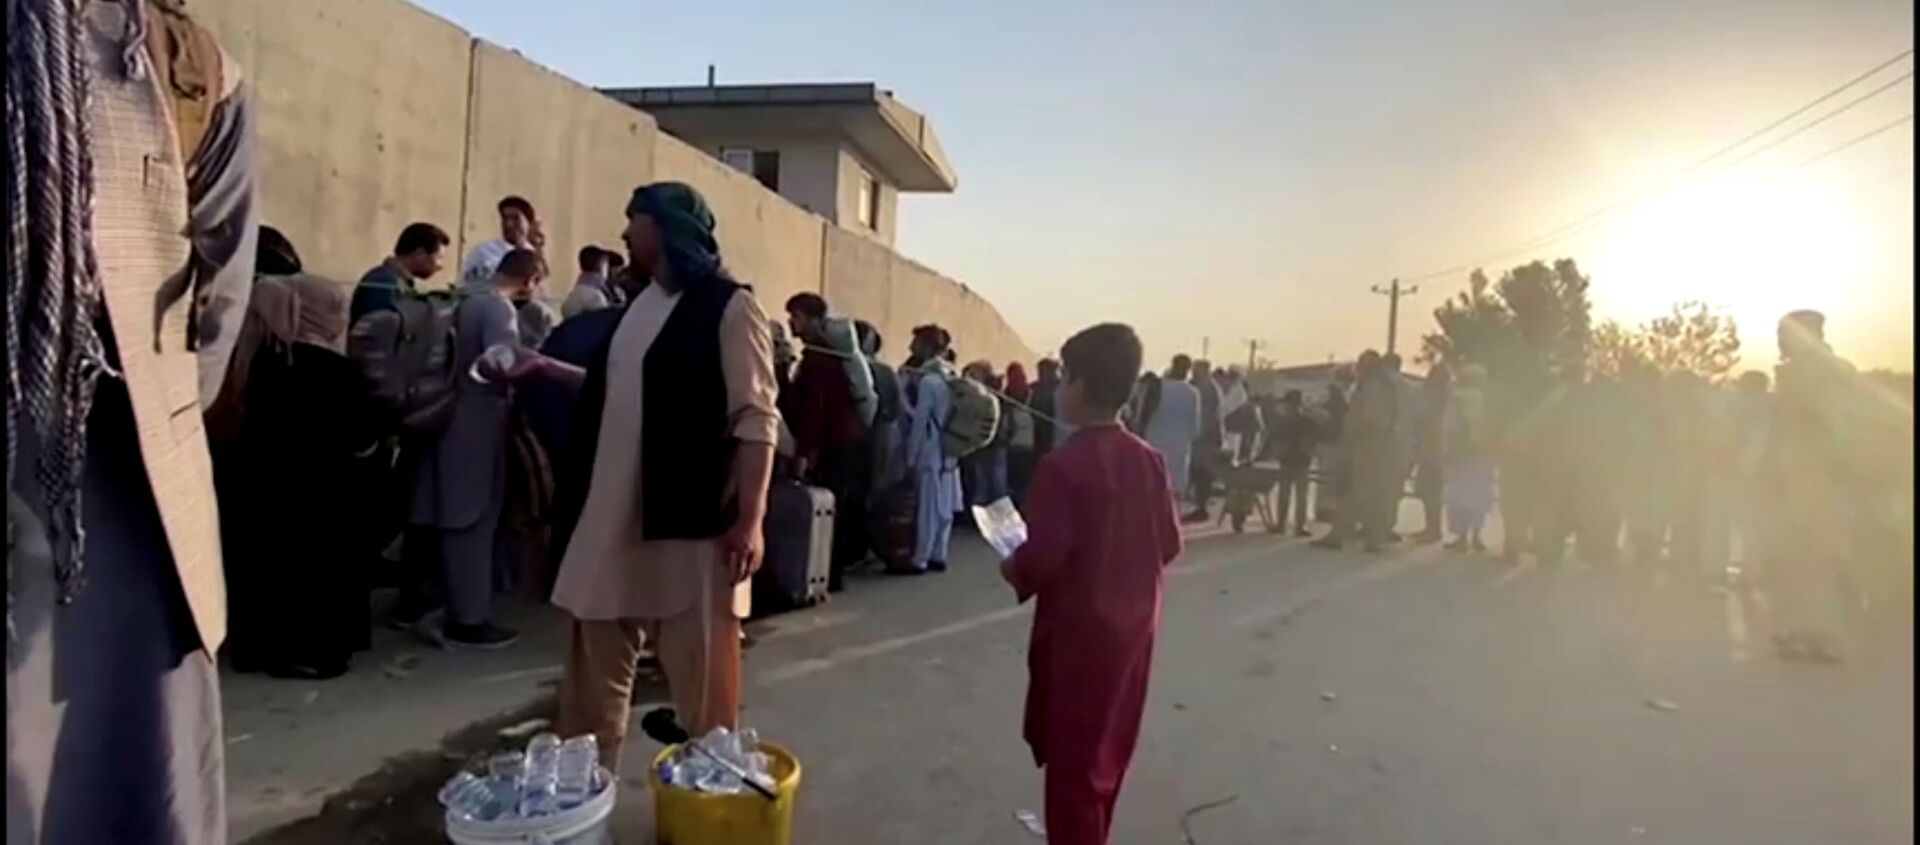 A man instructs people to queue as they stand with their belongings outside Kabul airport, Afghanistan, August 22, 2021 in this still image taken from video - Sputnik International, 1920, 23.08.2021